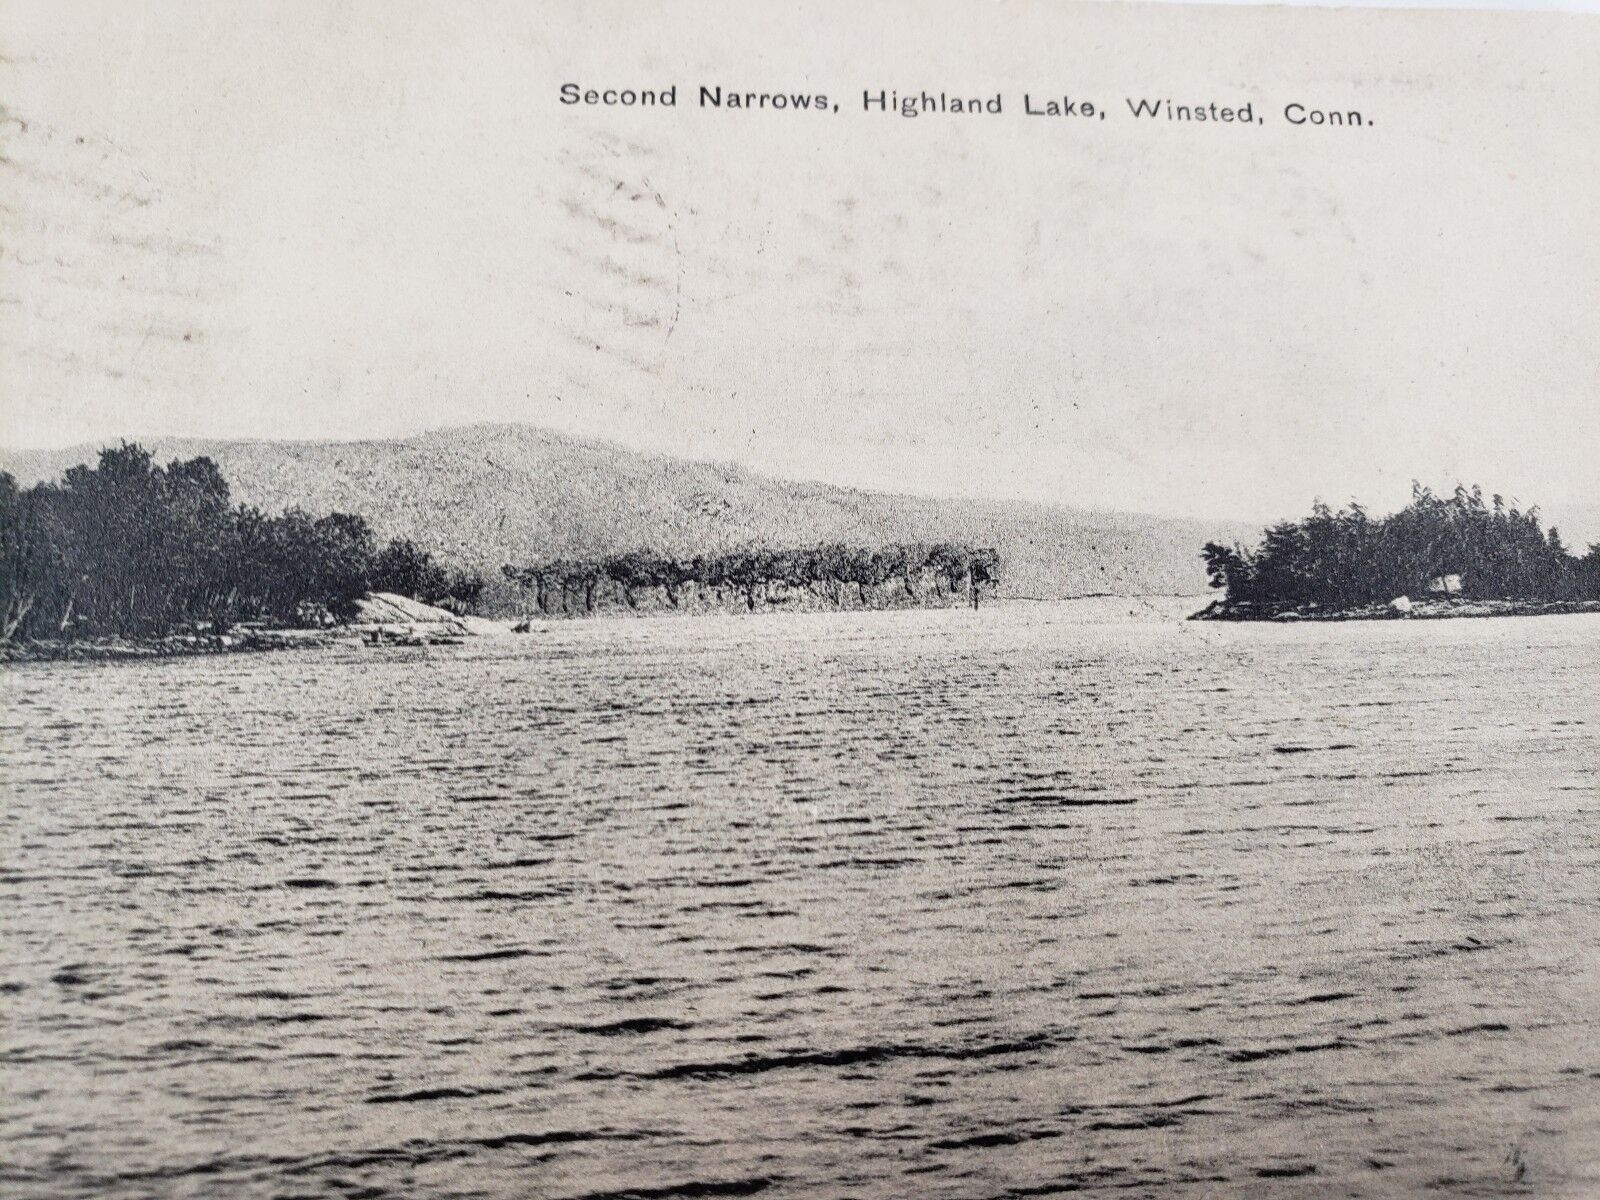 C 1911 Second Narrows Highland Lake Winsted Connecticut DB Postcard 